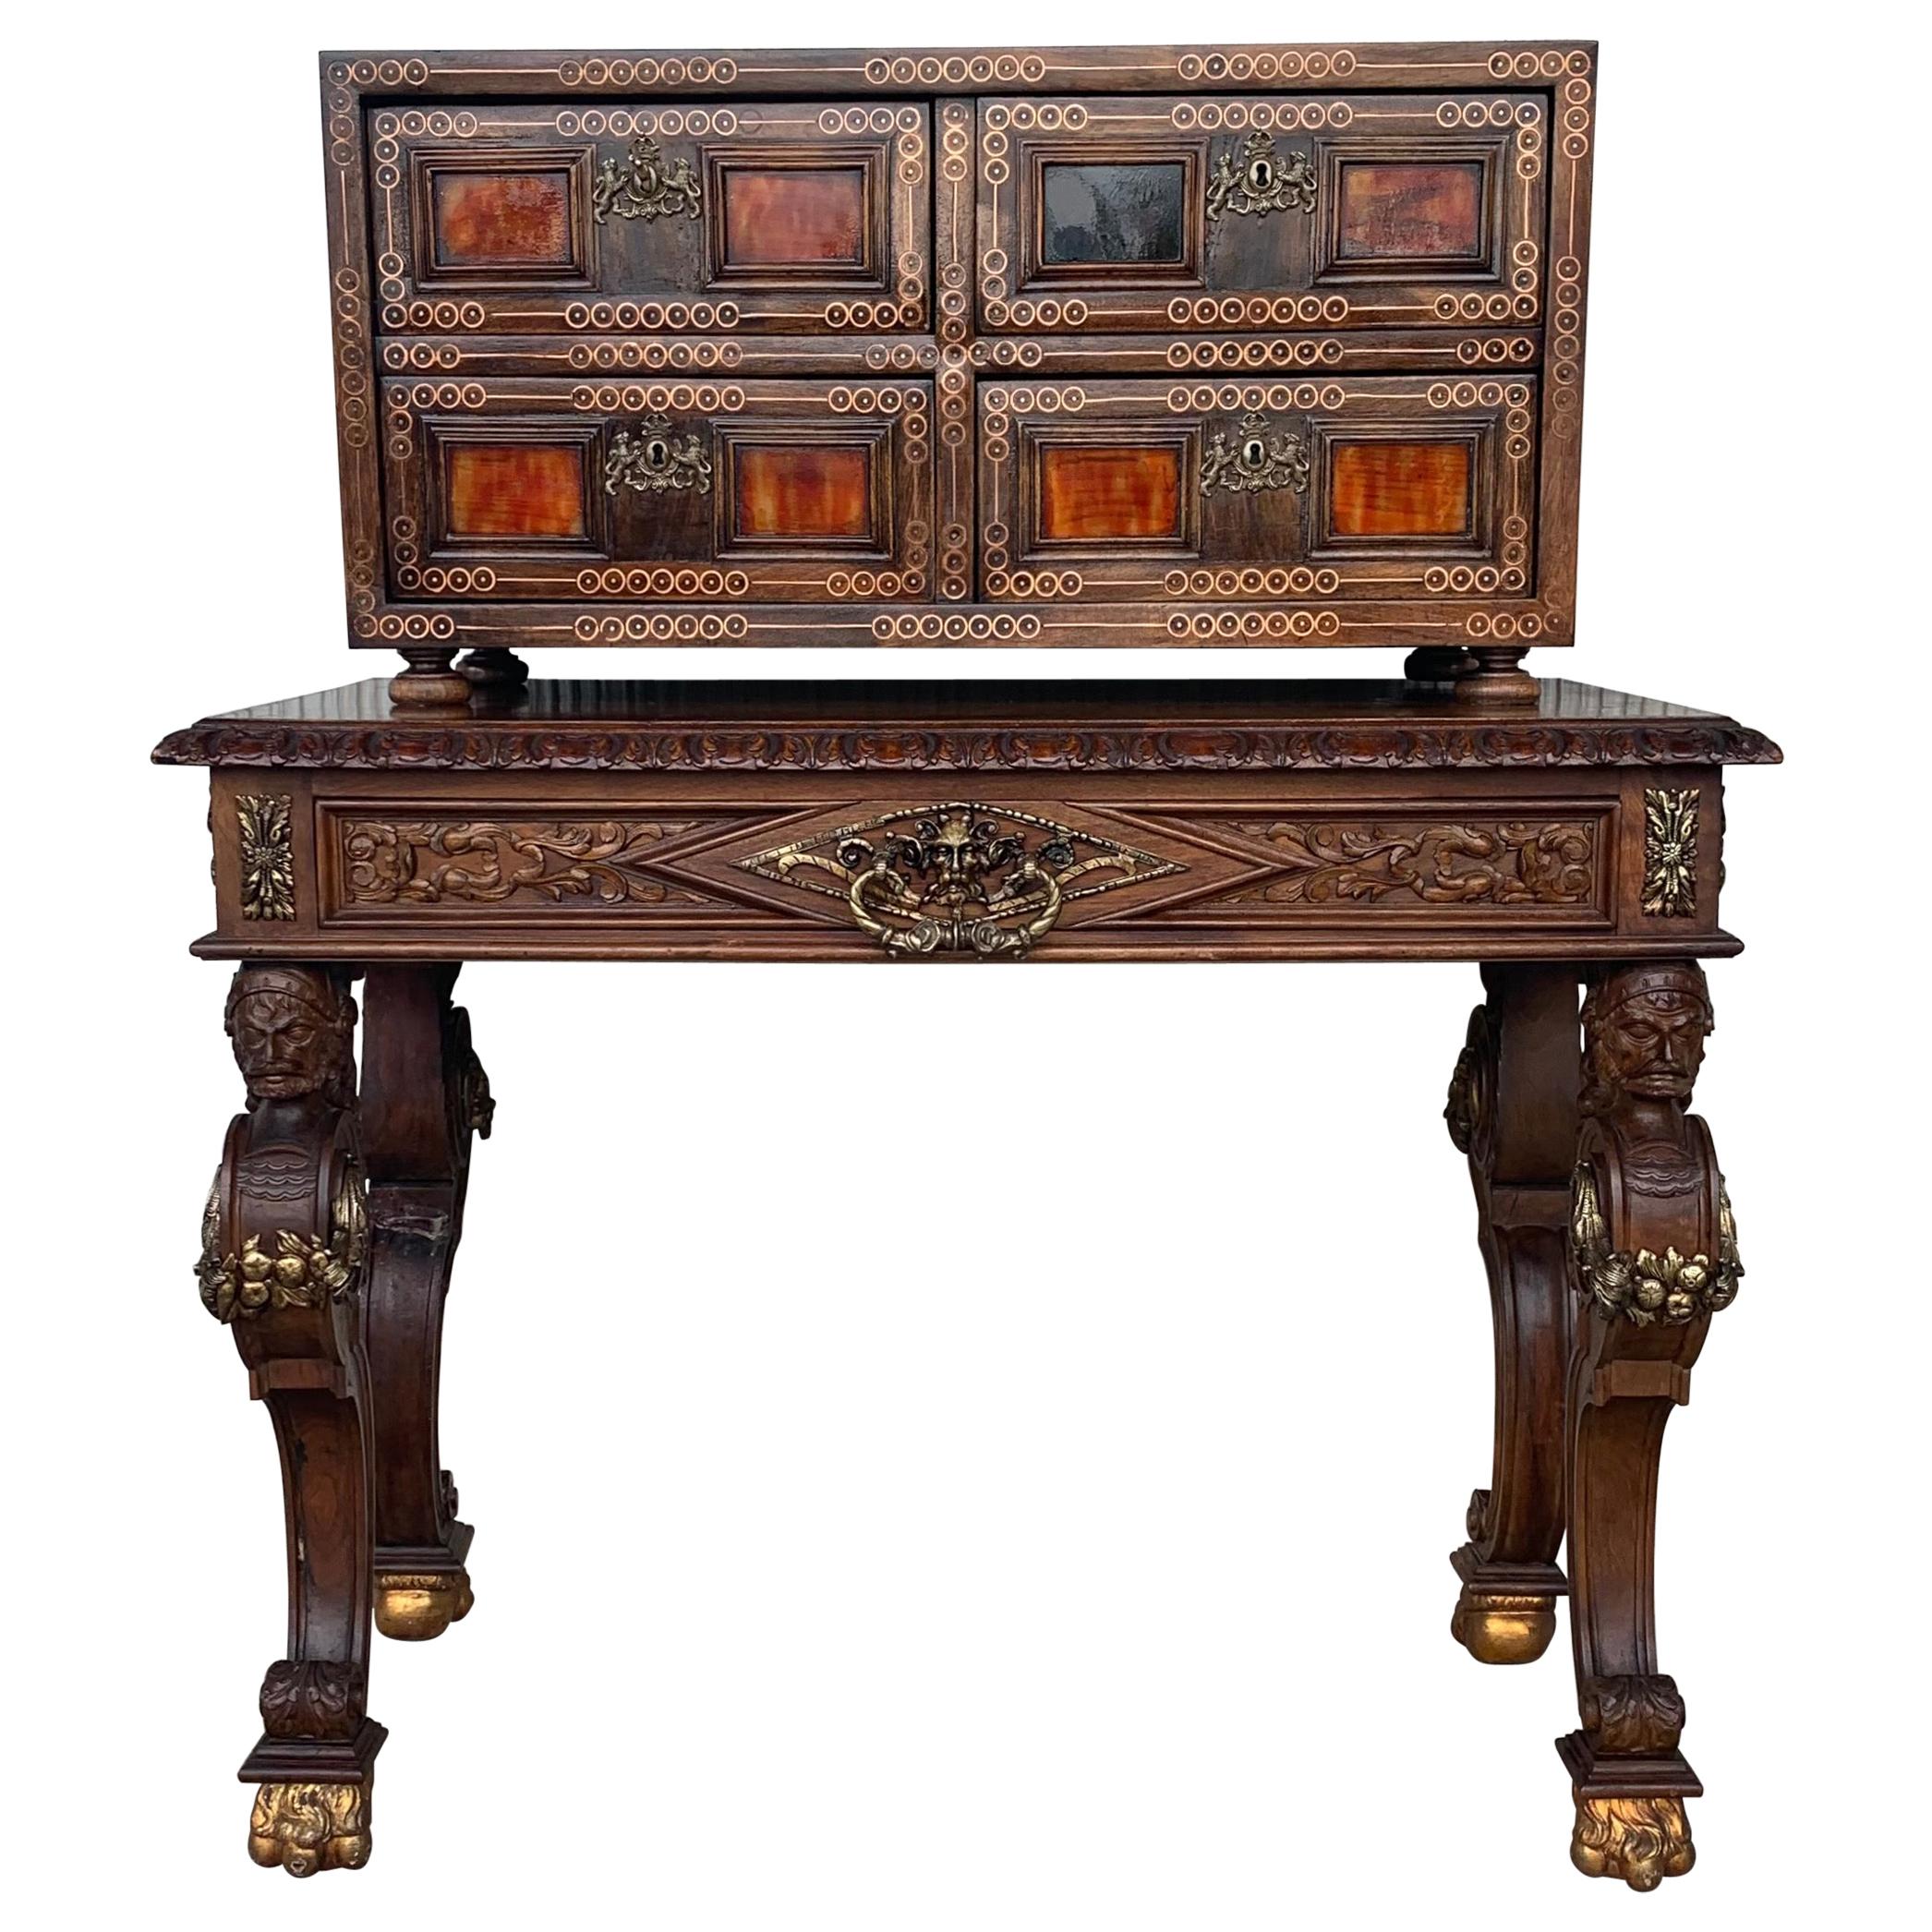 20th Italian Cabinet on Stand, Baroque Bargueno with Inlays & Mounts